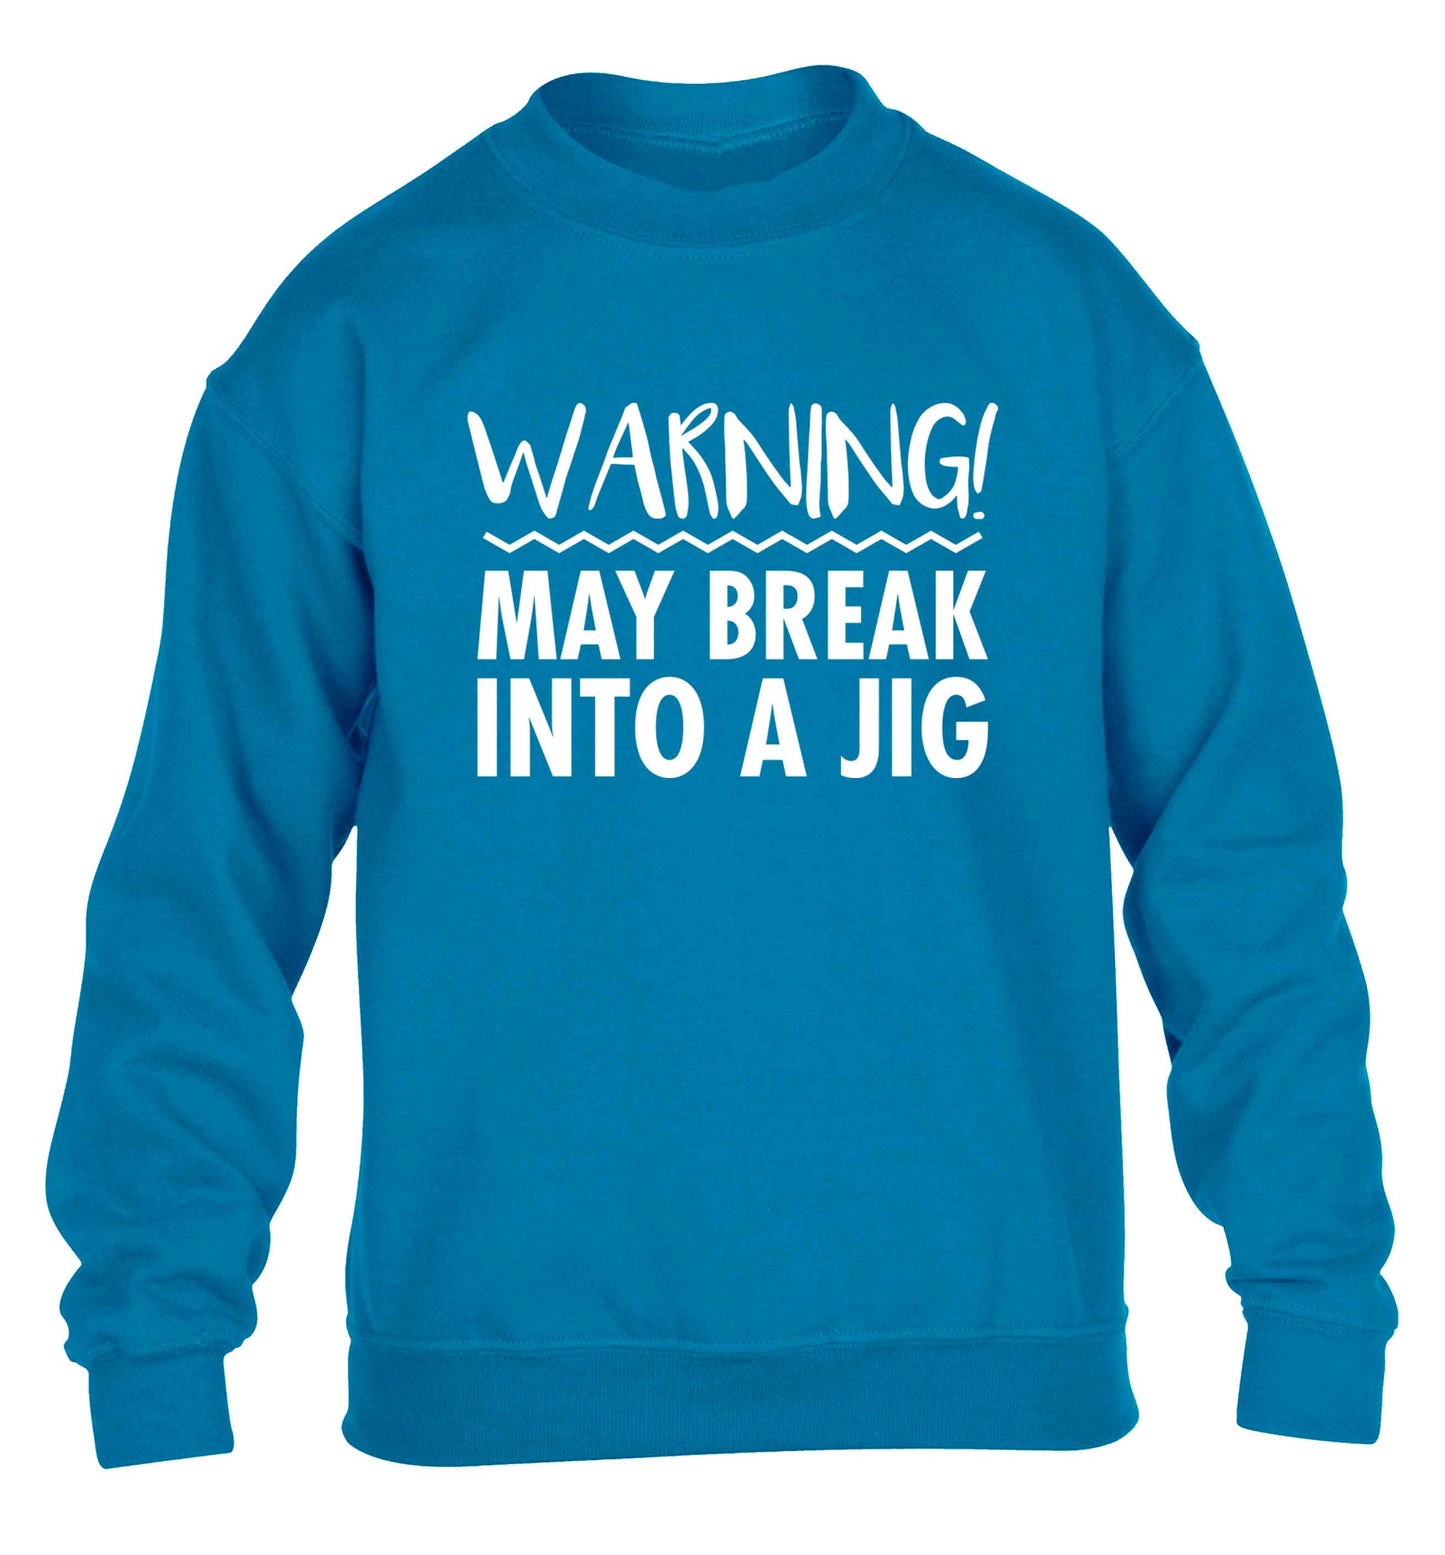 Warning may break into a jig children's blue sweater 12-13 Years